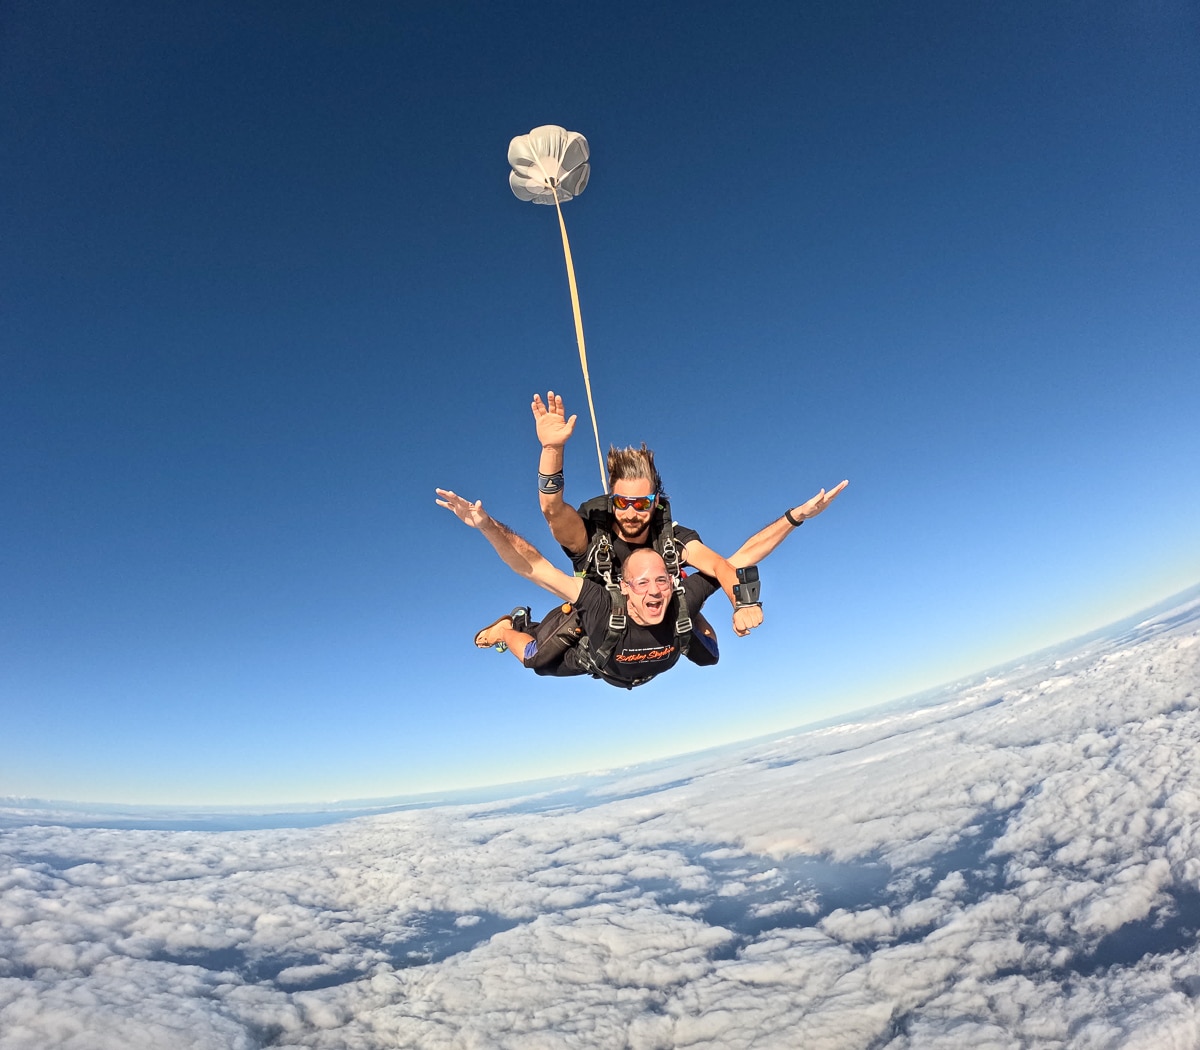 Our Sky Diving Adventure!